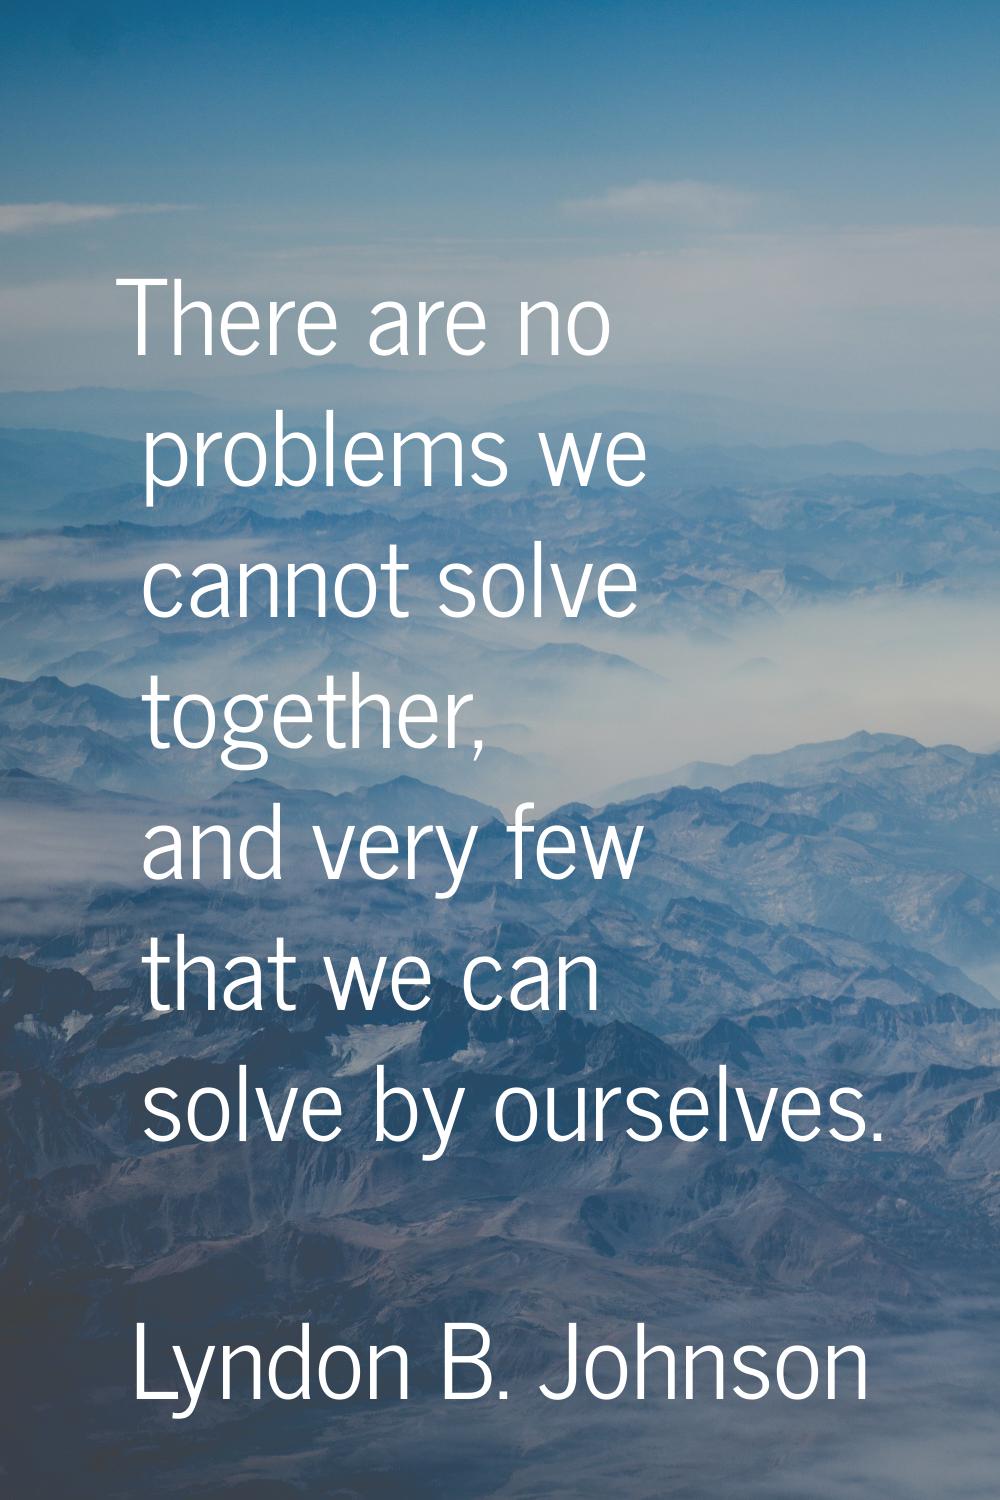 There are no problems we cannot solve together, and very few that we can solve by ourselves.